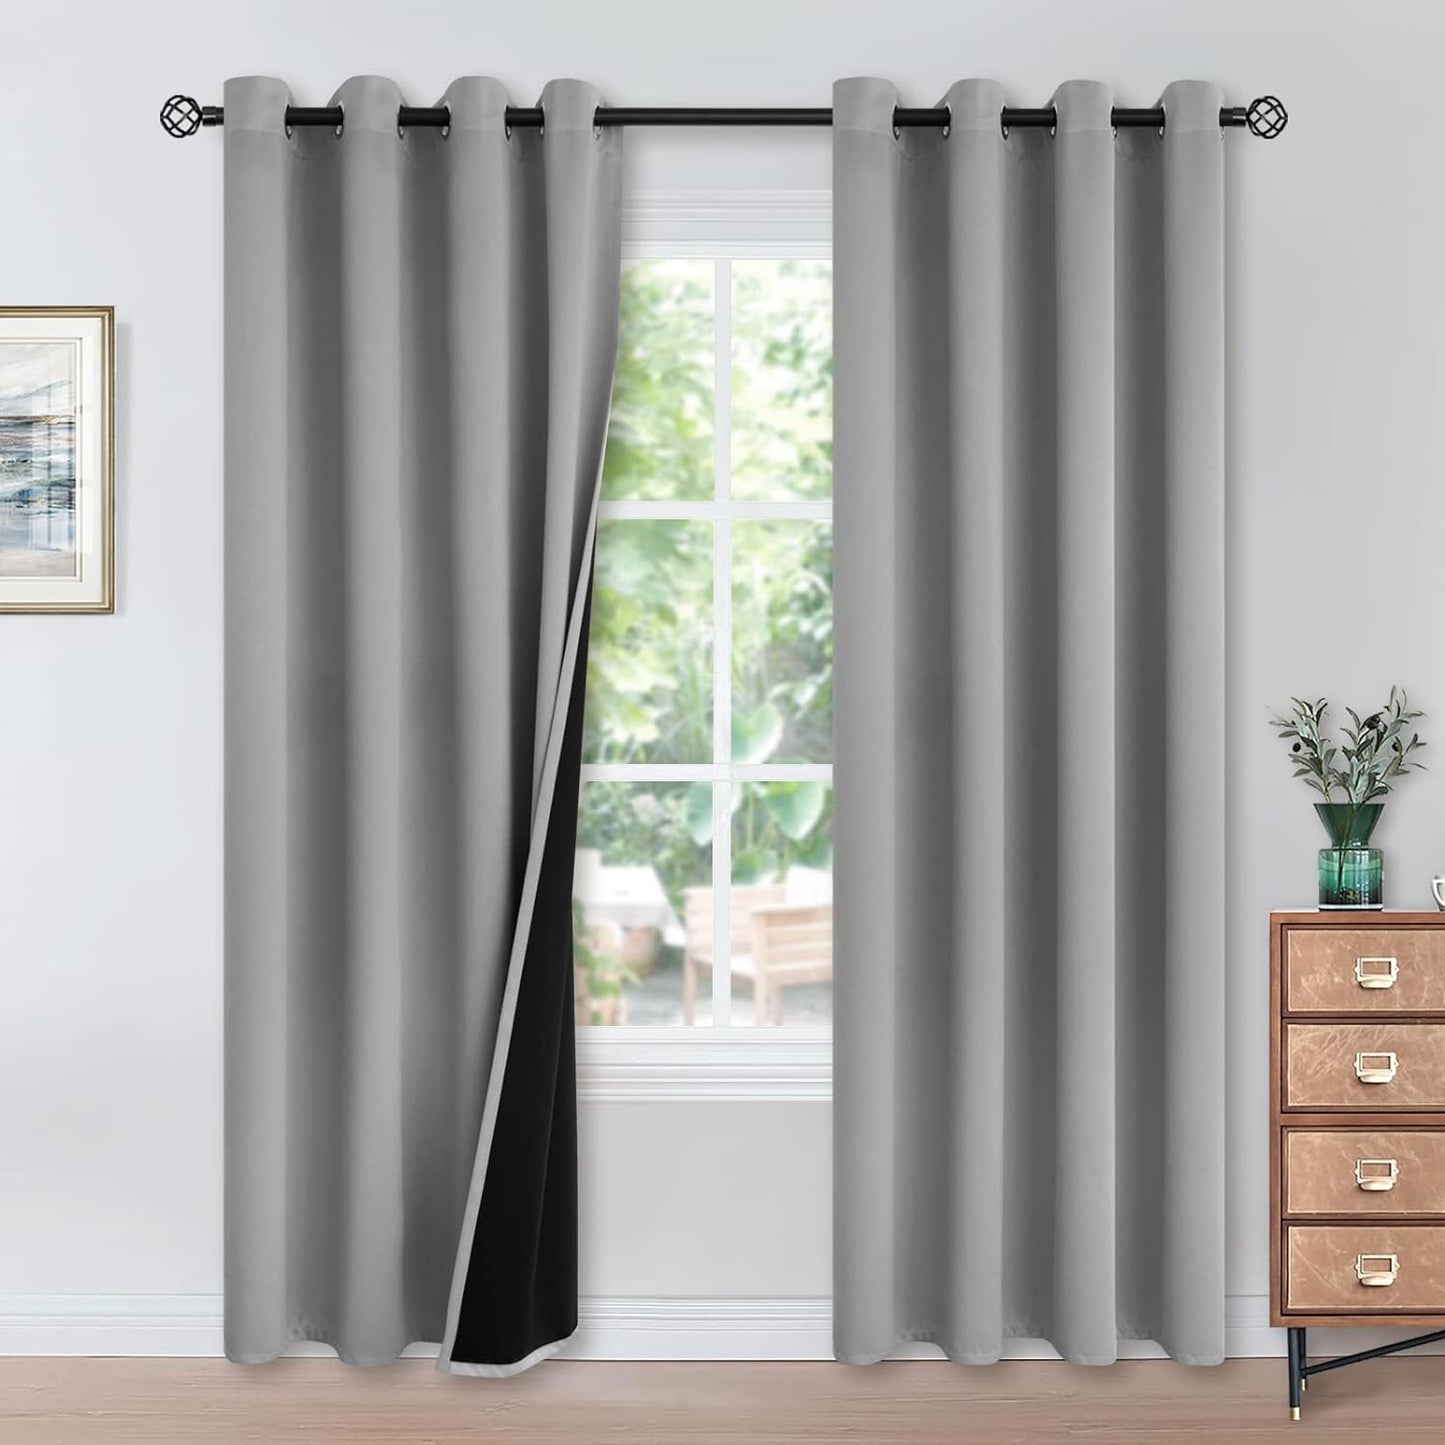 Youngstex Black 100% Blackout Curtains 63 Inches for Bedroom Thermal Insulated Total Room Darkening Curtains for Living Room Window with Black Back Grommet, 2 Panels, 42 X 63 Inch  YoungsTex Light Grey 52W X 95L 